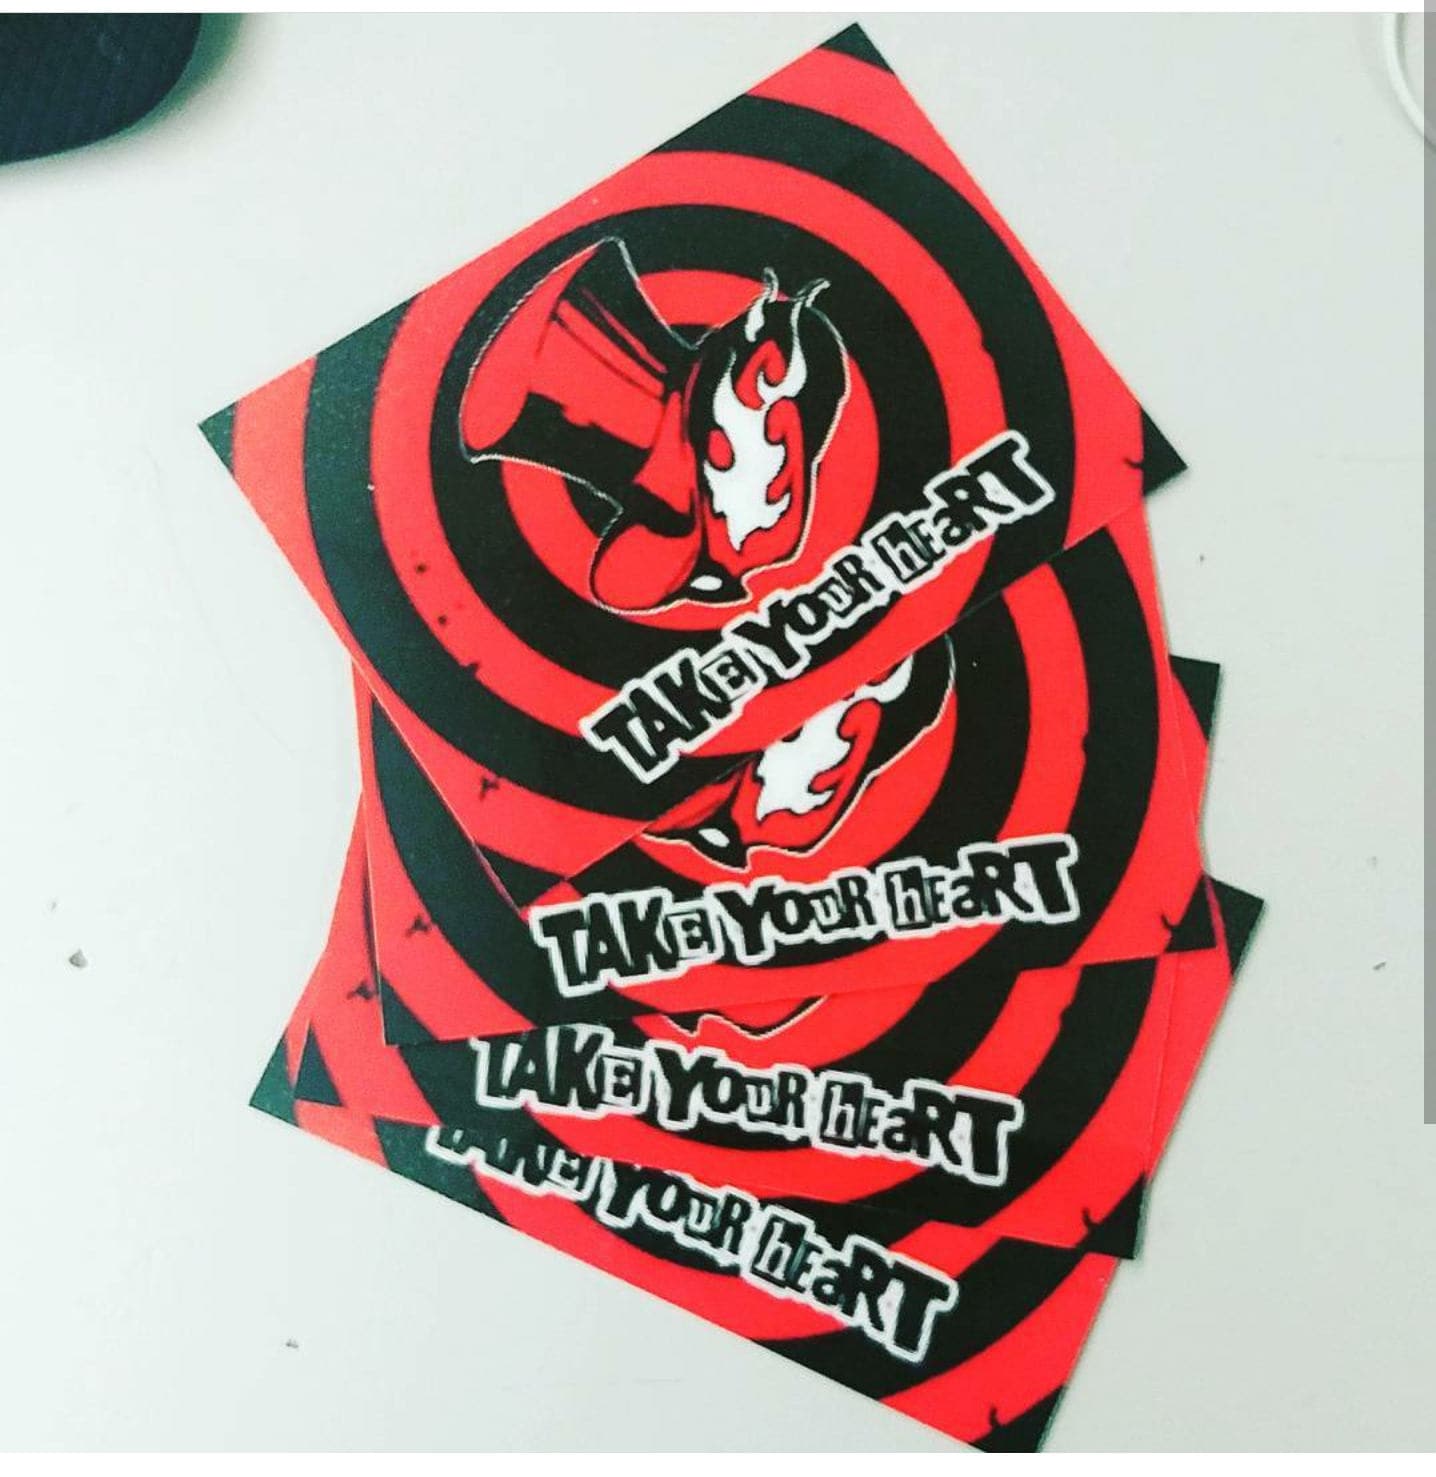 Persona 5 calling cards 4 in each order